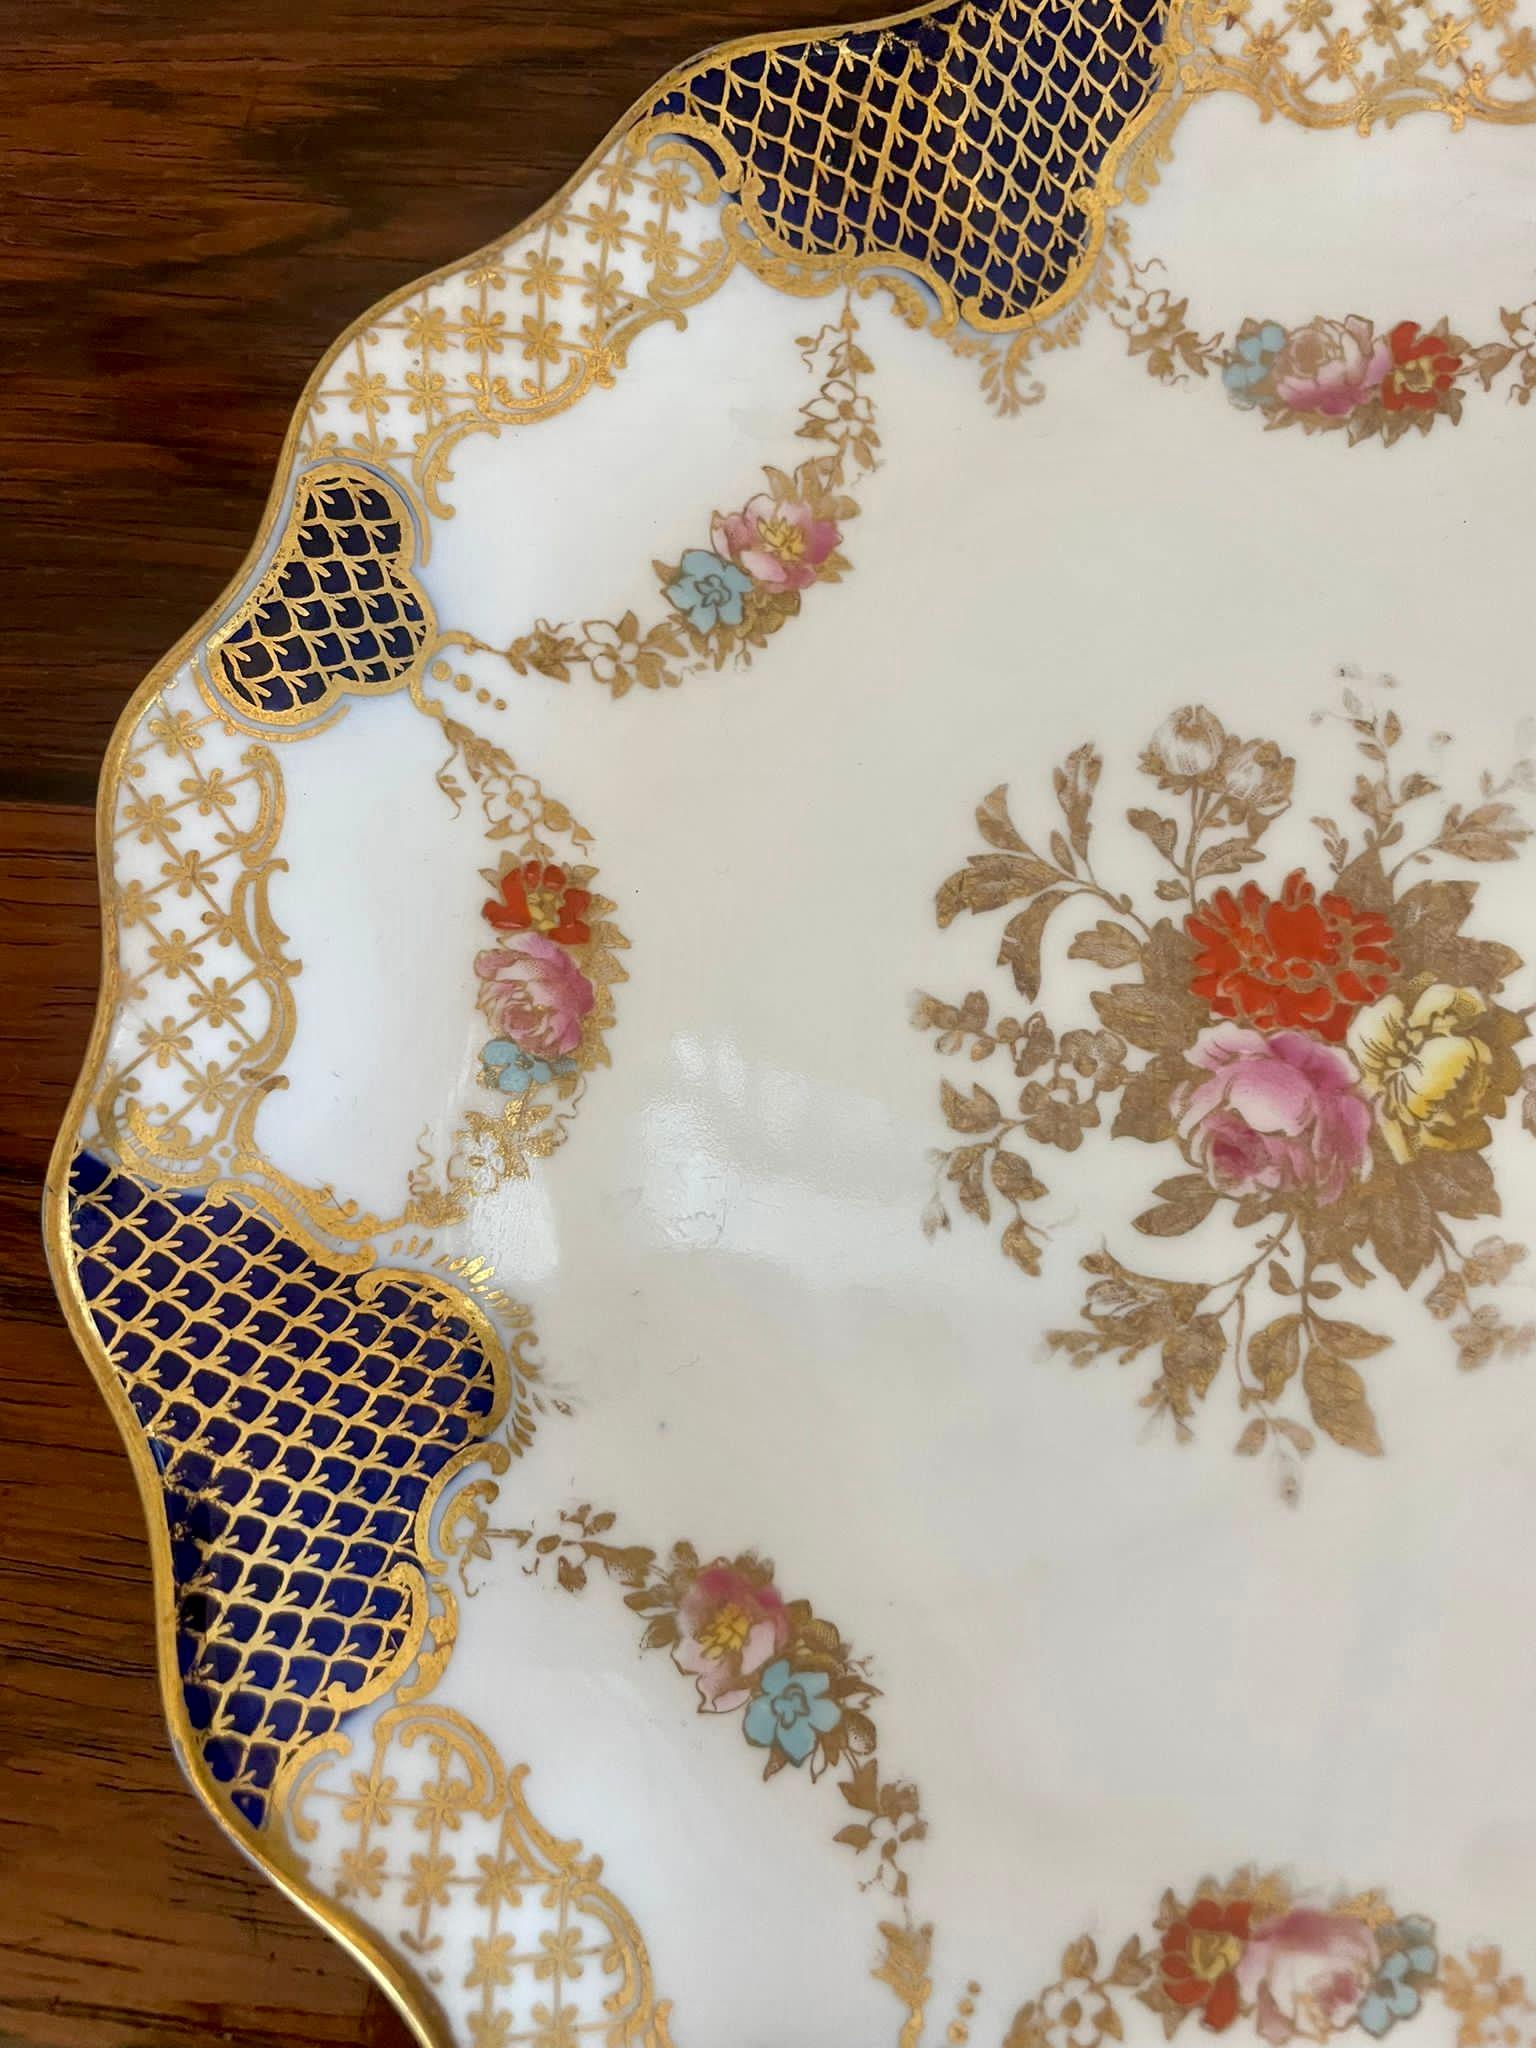 Superb quality pair of antique Edwardian hand painted Wedgwood shaped plates having a pair of antique Edwardian Wedgwood shaped dishes with fantastic quality hand painted decoration in red, pink, yellow, blue and gold colours 


Charming plates in